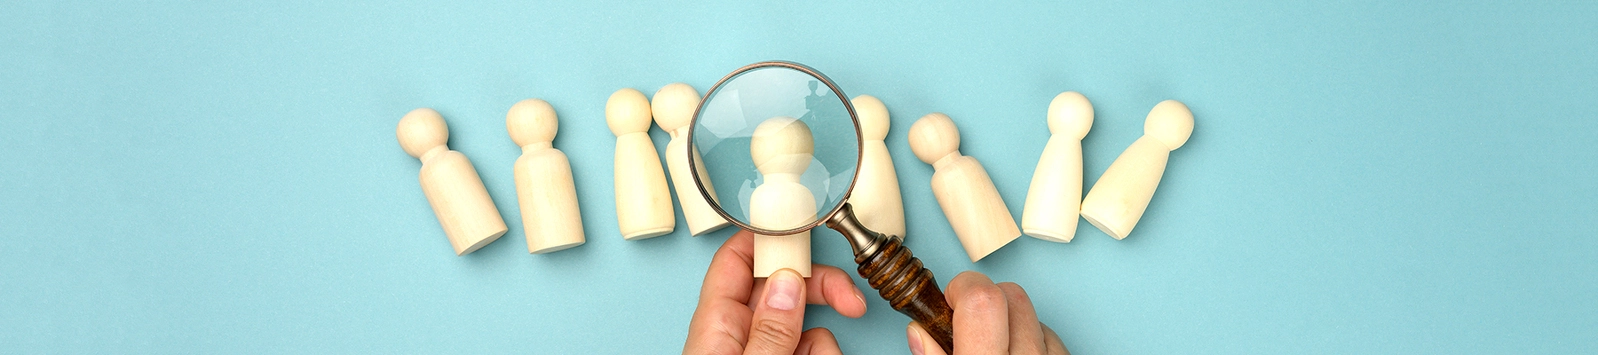 wooden figures and magnifying glass on blue background